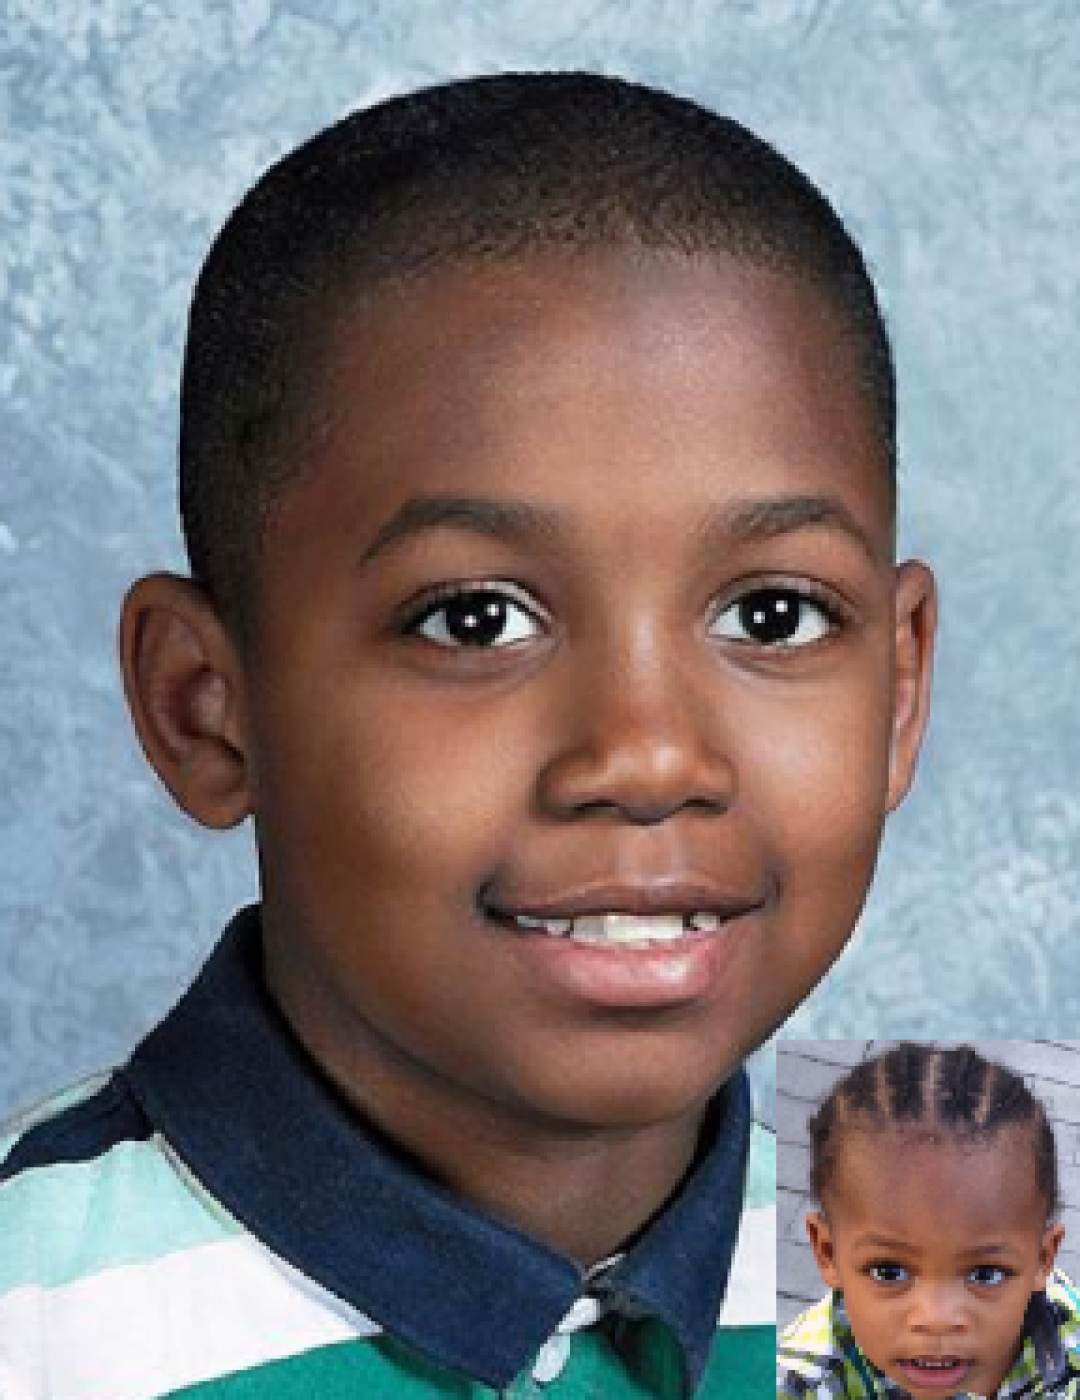 King Walker. Missing child with brown hair and brown eyes. Age progressed photo shows what King looks like at 6 years old: young boy with long light brown hair and brown eyes.